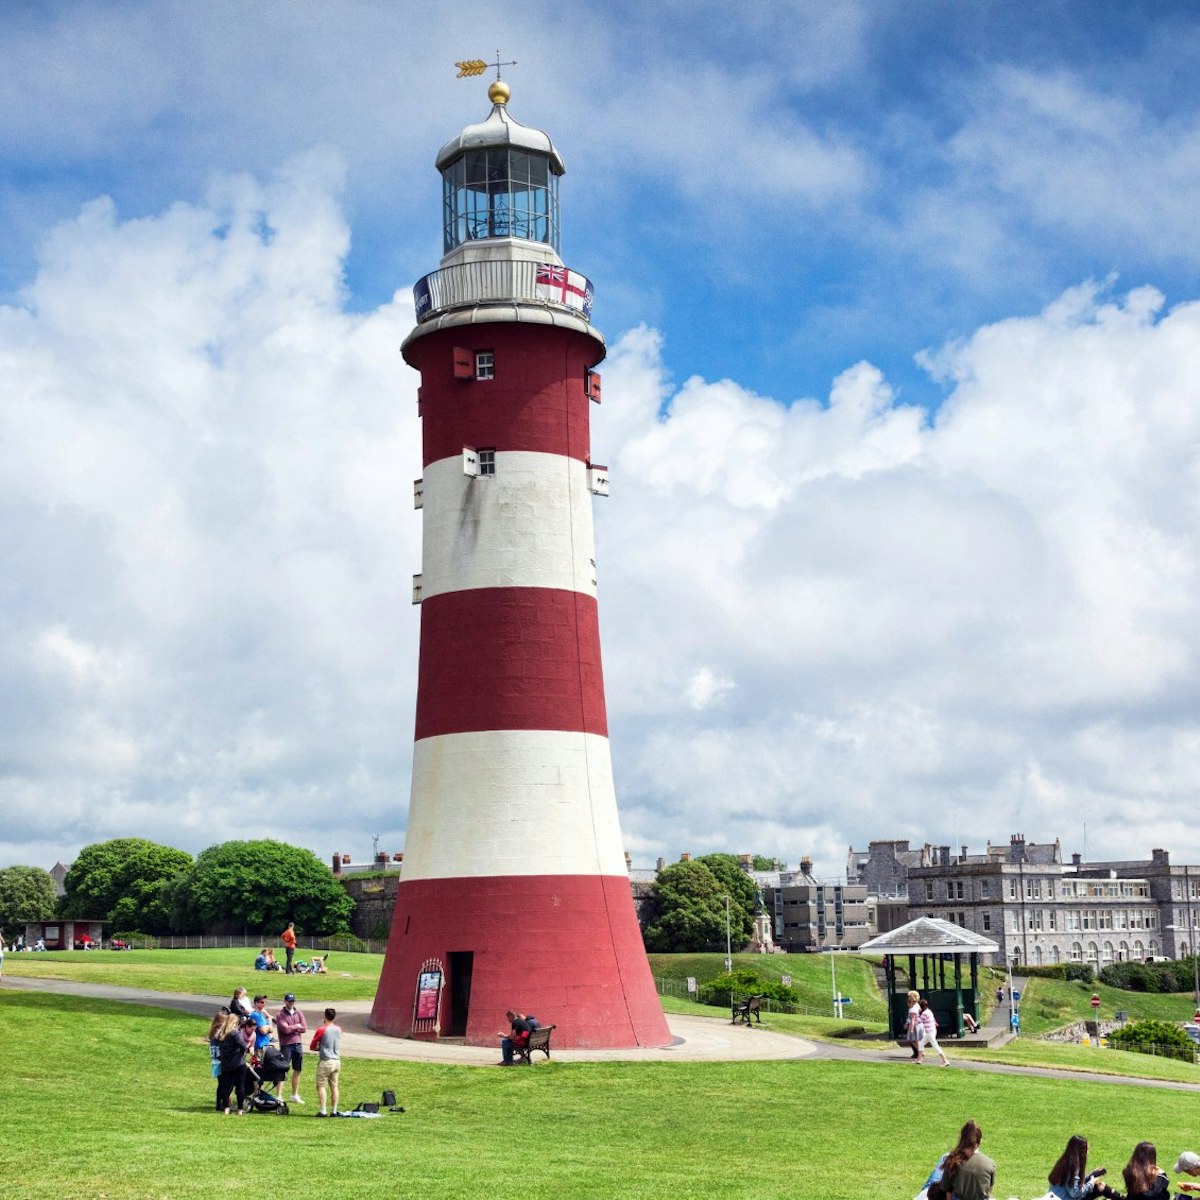 2 June 2018: Devon, UK - Smeaton's Tower is the third Eddystone Lighthouse, built by John Smeaton, which was dismantled and rebuilt on Plymouth Hoe as a memorial.; Shutterstock ID 1194001051; your: Bridget Brown; gl: 65050; netsuite: Online Editorial; full: POI Image Update